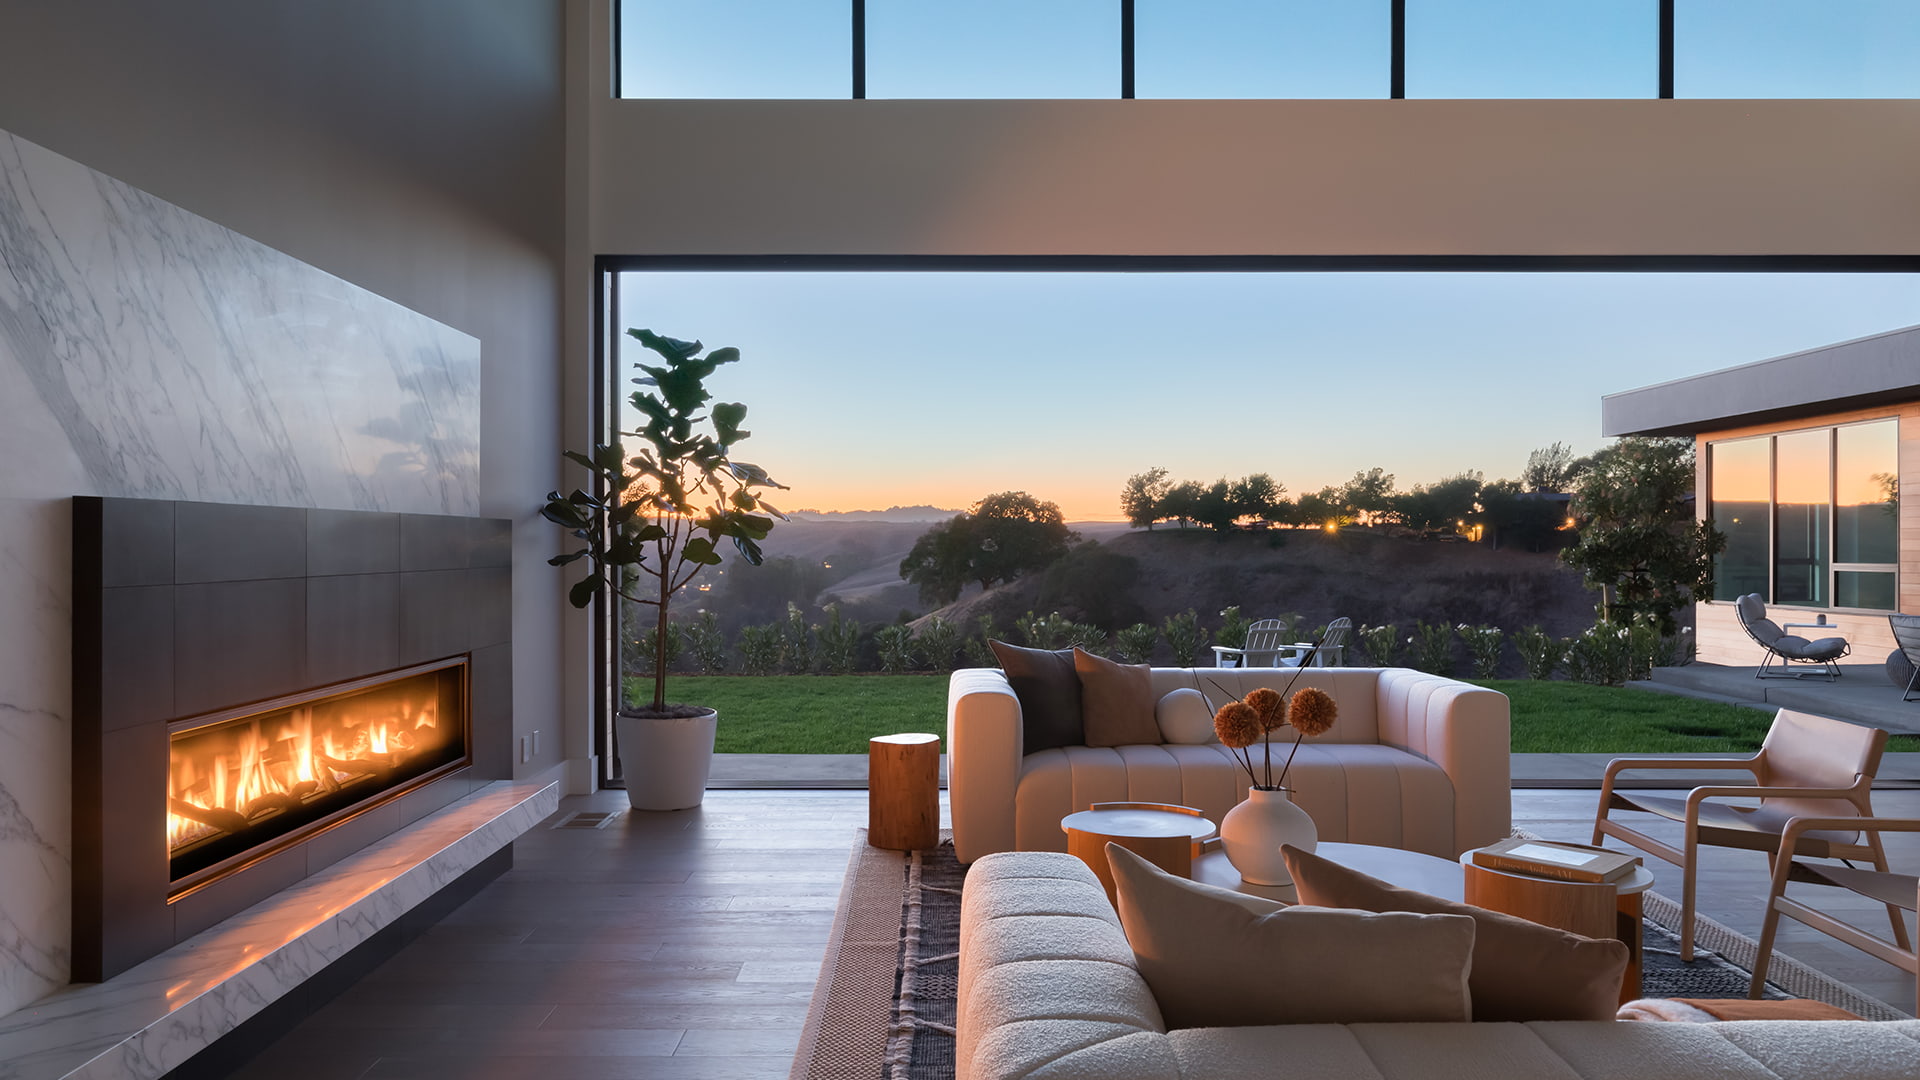 Lucas Ranch home interior at dusk with pocket doors open